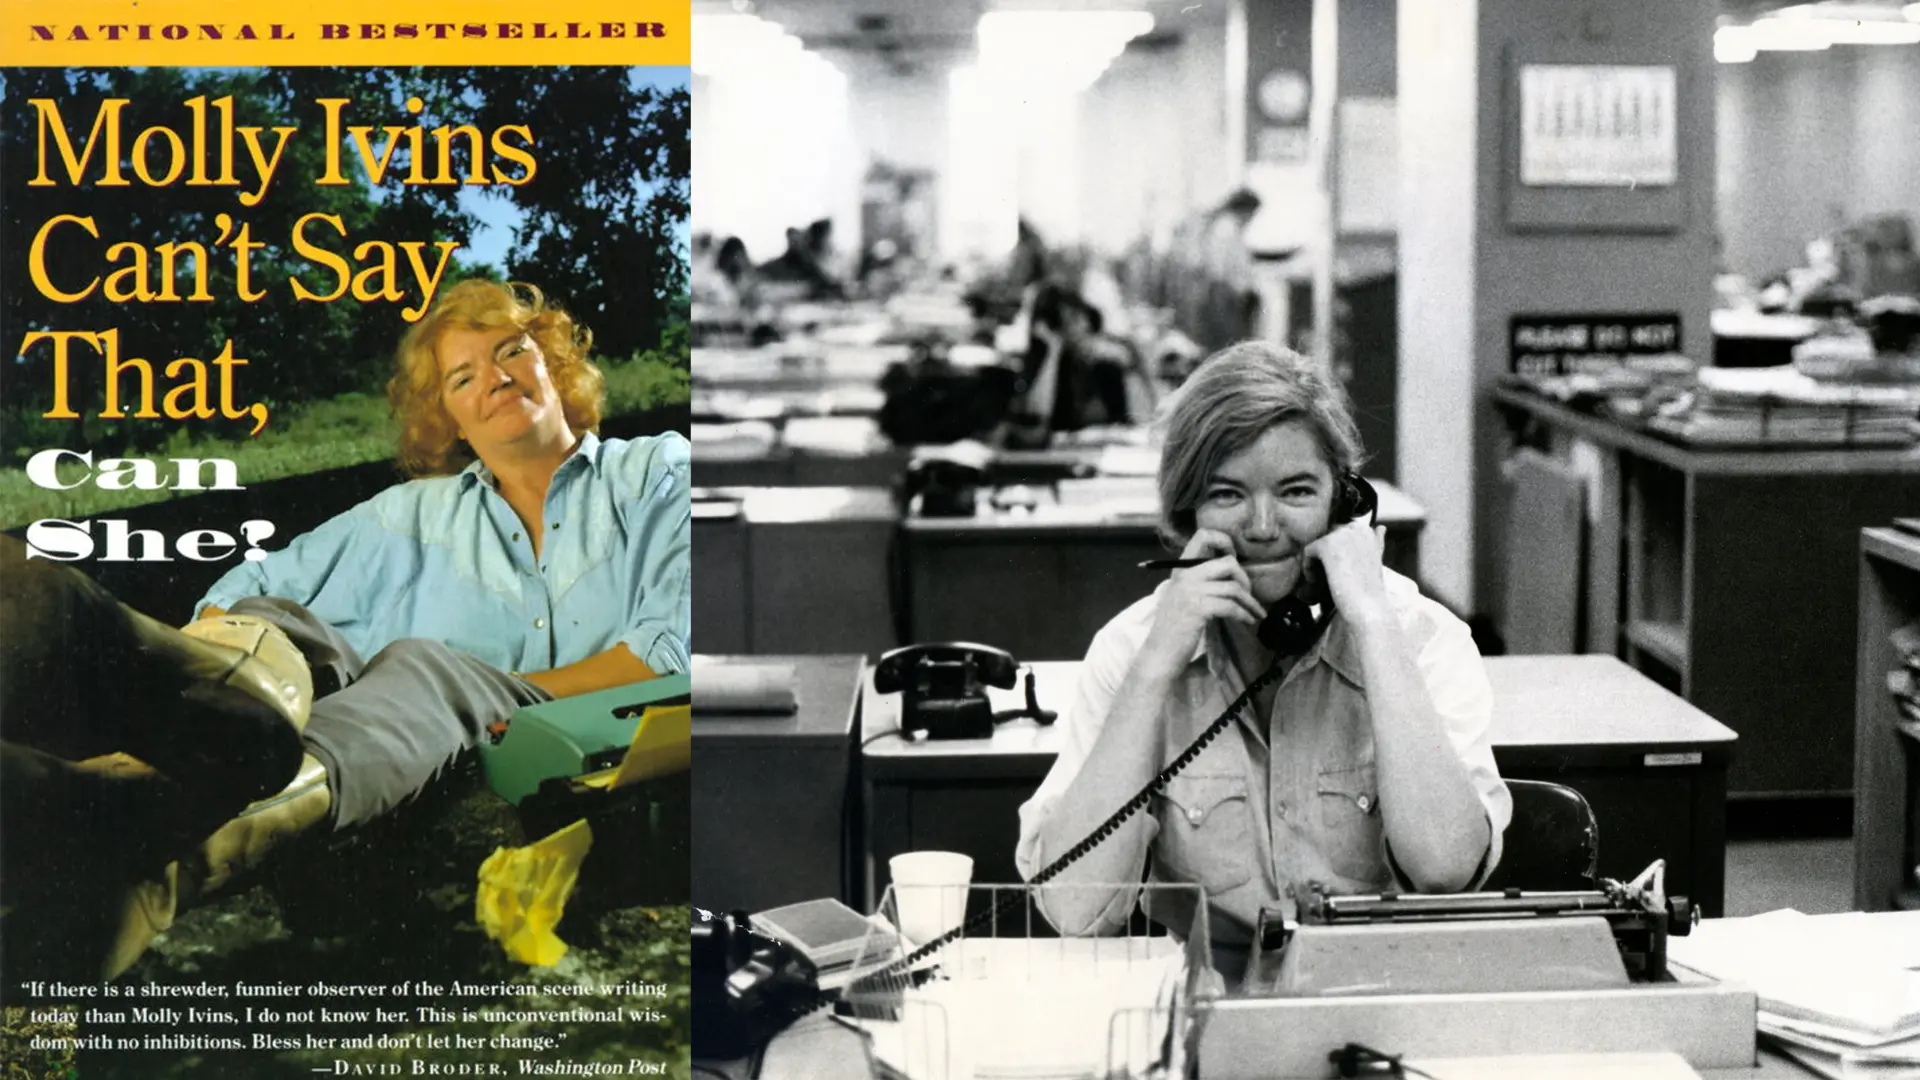 My Afternoon with Molly Ivins